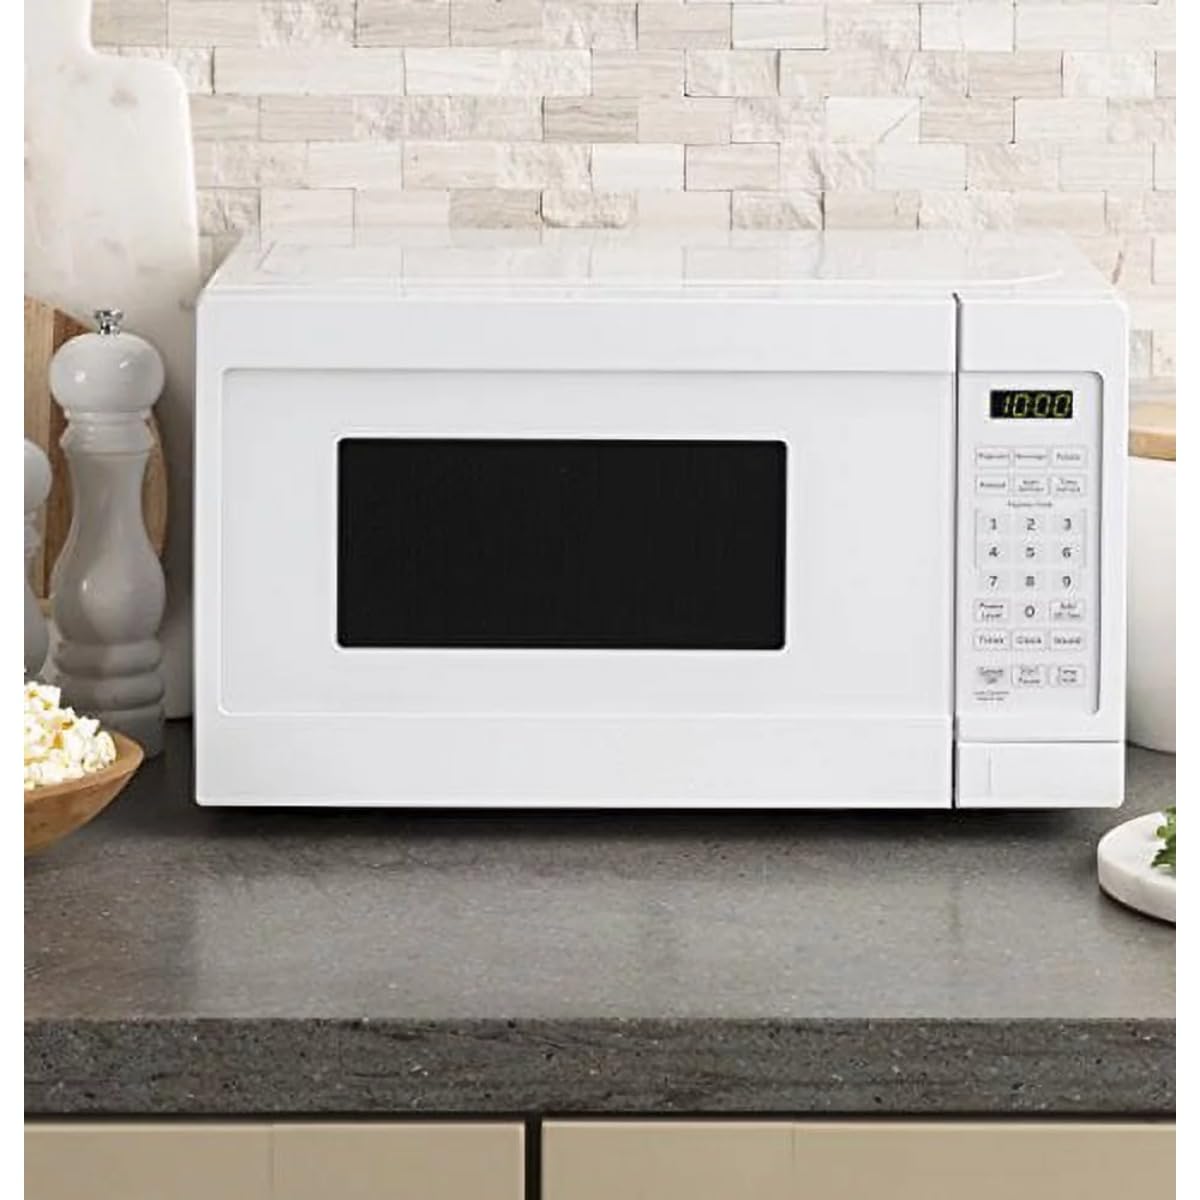 0.7 Cu. Ft. Capacity Countertop Microwave Oven, White